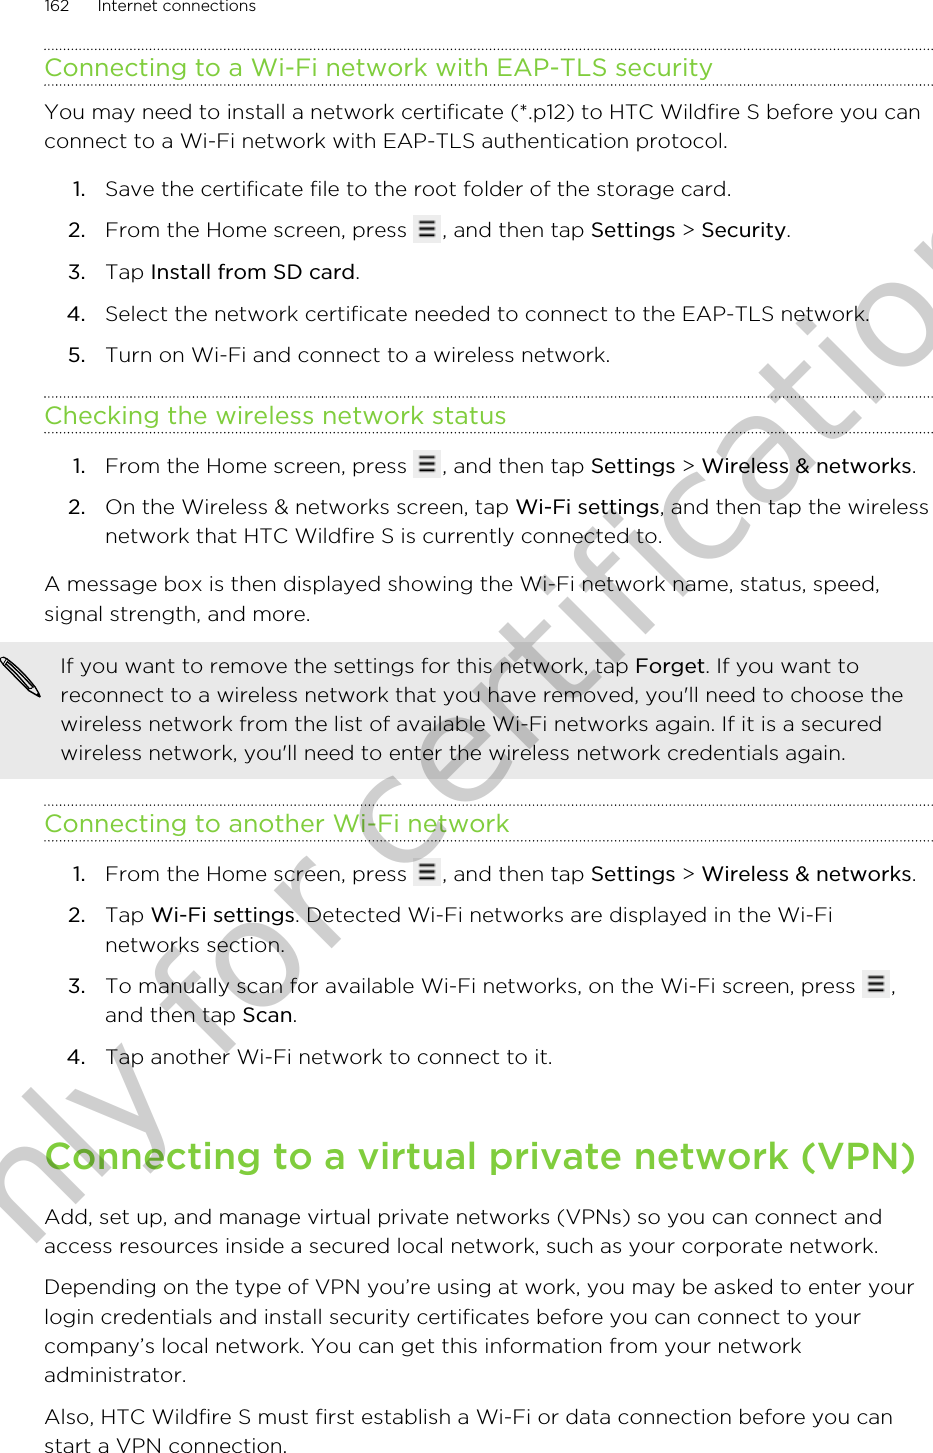 Connecting to a Wi-Fi network with EAP-TLS securityYou may need to install a network certificate (*.p12) to HTC Wildfire S before you canconnect to a Wi-Fi network with EAP-TLS authentication protocol.1. Save the certificate file to the root folder of the storage card.2. From the Home screen, press  , and then tap Settings &gt; Security.3. Tap Install from SD card.4. Select the network certificate needed to connect to the EAP-TLS network.5. Turn on Wi-Fi and connect to a wireless network.Checking the wireless network status1. From the Home screen, press  , and then tap Settings &gt; Wireless &amp; networks.2. On the Wireless &amp; networks screen, tap Wi-Fi settings, and then tap the wirelessnetwork that HTC Wildfire S is currently connected to.A message box is then displayed showing the Wi-Fi network name, status, speed,signal strength, and more.If you want to remove the settings for this network, tap Forget. If you want toreconnect to a wireless network that you have removed, you&apos;ll need to choose thewireless network from the list of available Wi-Fi networks again. If it is a securedwireless network, you&apos;ll need to enter the wireless network credentials again.Connecting to another Wi-Fi network1. From the Home screen, press  , and then tap Settings &gt; Wireless &amp; networks.2. Tap Wi-Fi settings. Detected Wi-Fi networks are displayed in the Wi-Finetworks section.3. To manually scan for available Wi-Fi networks, on the Wi-Fi screen, press  ,and then tap Scan.4. Tap another Wi-Fi network to connect to it.Connecting to a virtual private network (VPN)Add, set up, and manage virtual private networks (VPNs) so you can connect andaccess resources inside a secured local network, such as your corporate network.Depending on the type of VPN you’re using at work, you may be asked to enter yourlogin credentials and install security certificates before you can connect to yourcompany’s local network. You can get this information from your networkadministrator.Also, HTC Wildfire S must first establish a Wi-Fi or data connection before you canstart a VPN connection.162 Internet connectionsOnly for certification